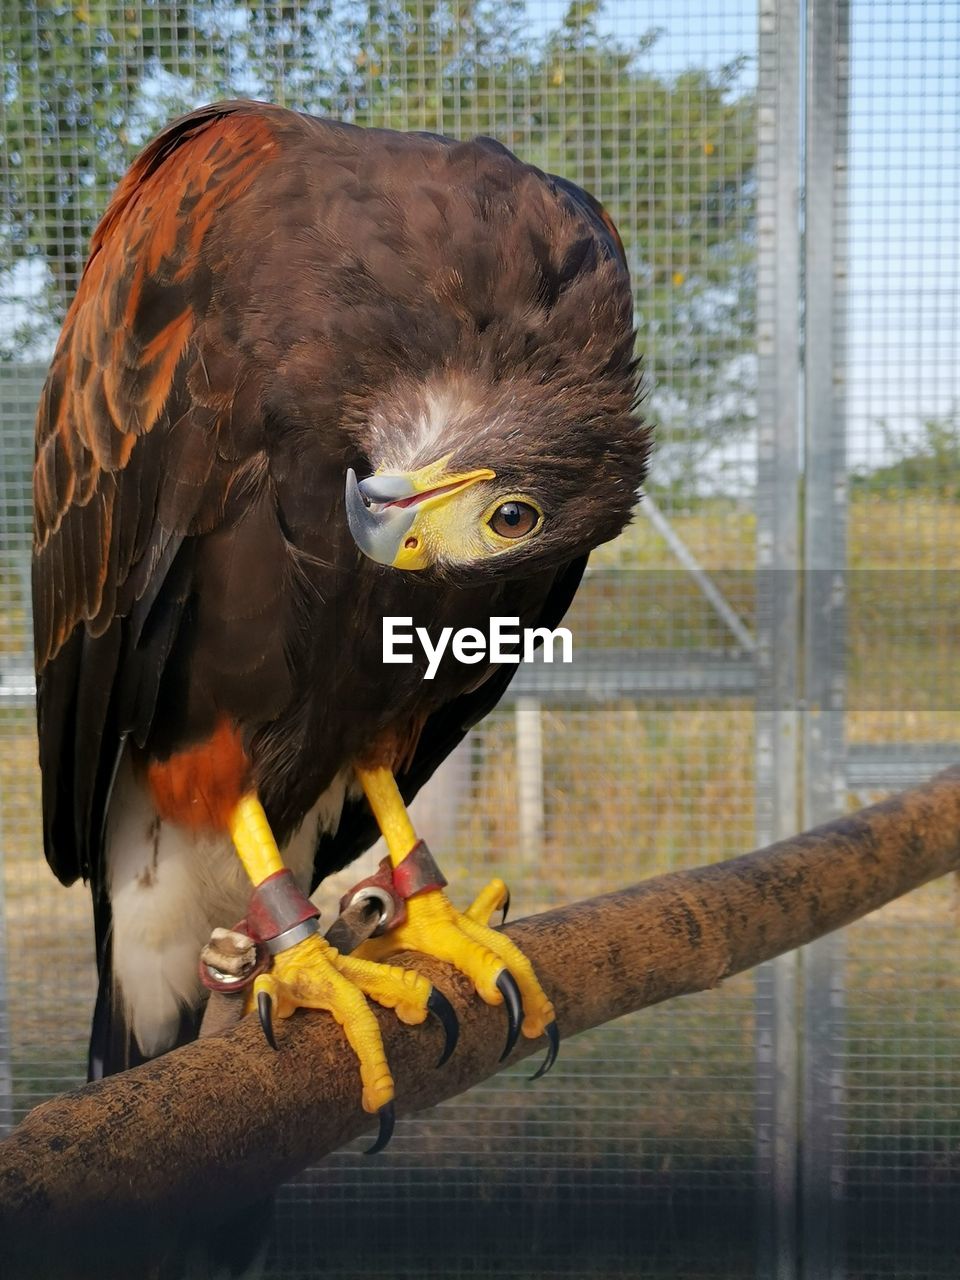 Eagle in zoo